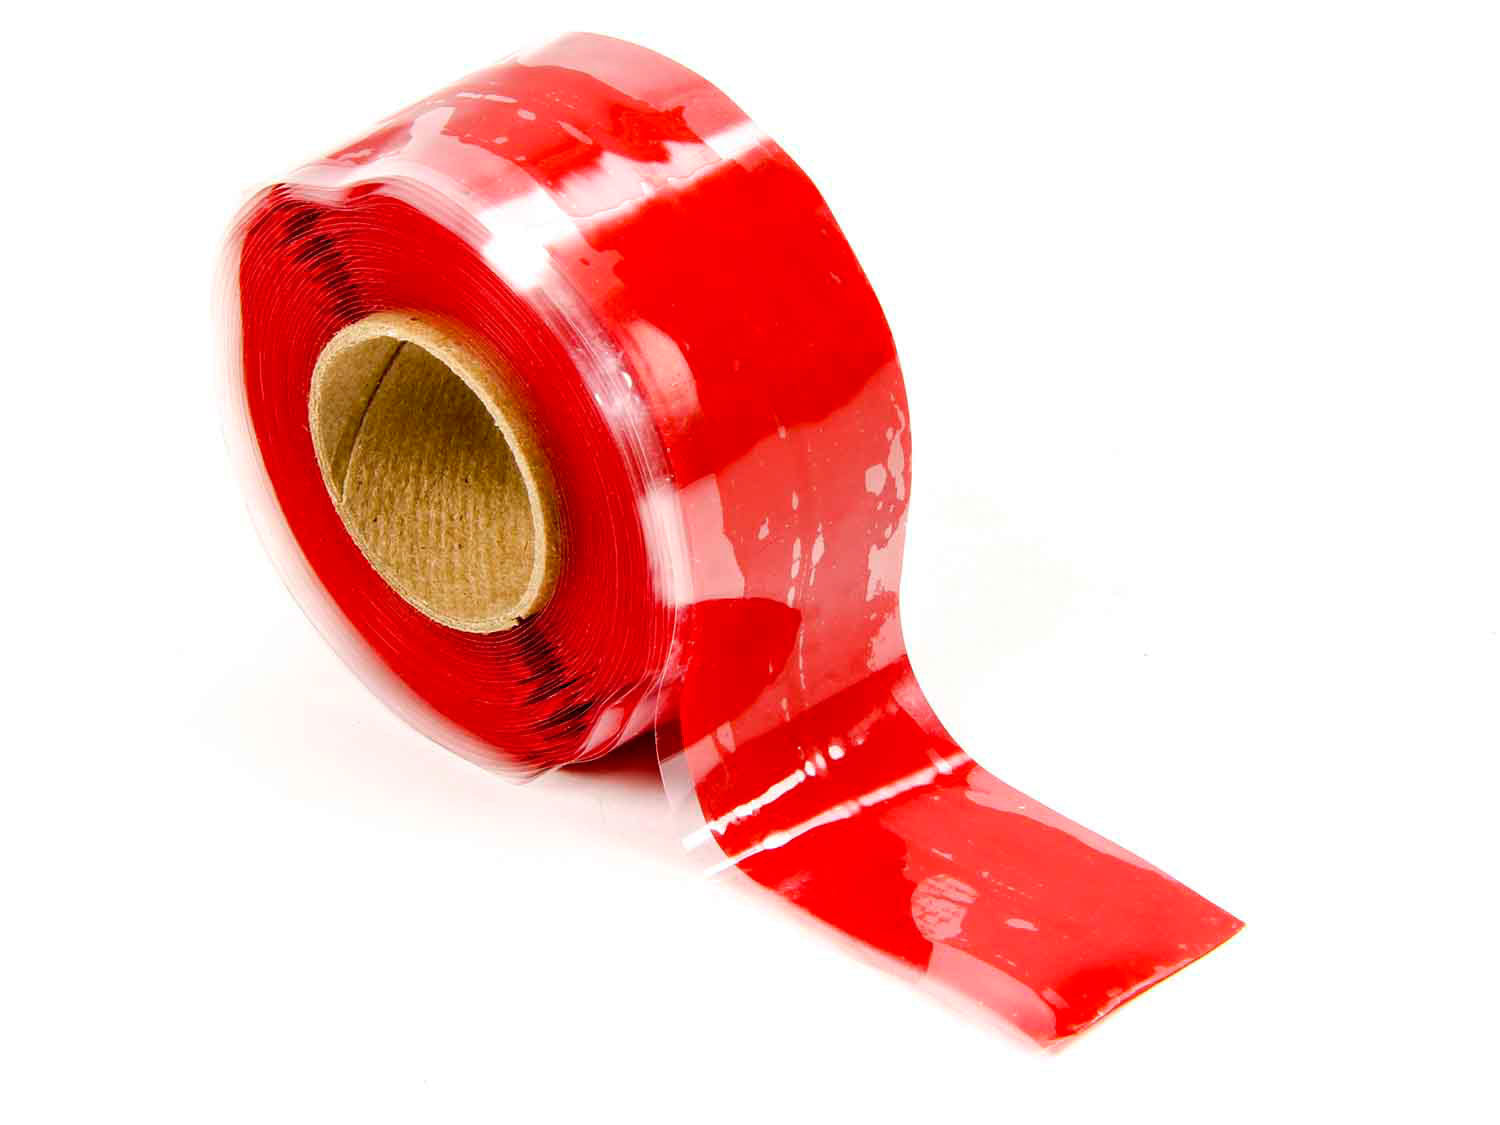 Design Engineering Quick Fix Tape Red 1in x 12ft Shop Equipment Tape main image